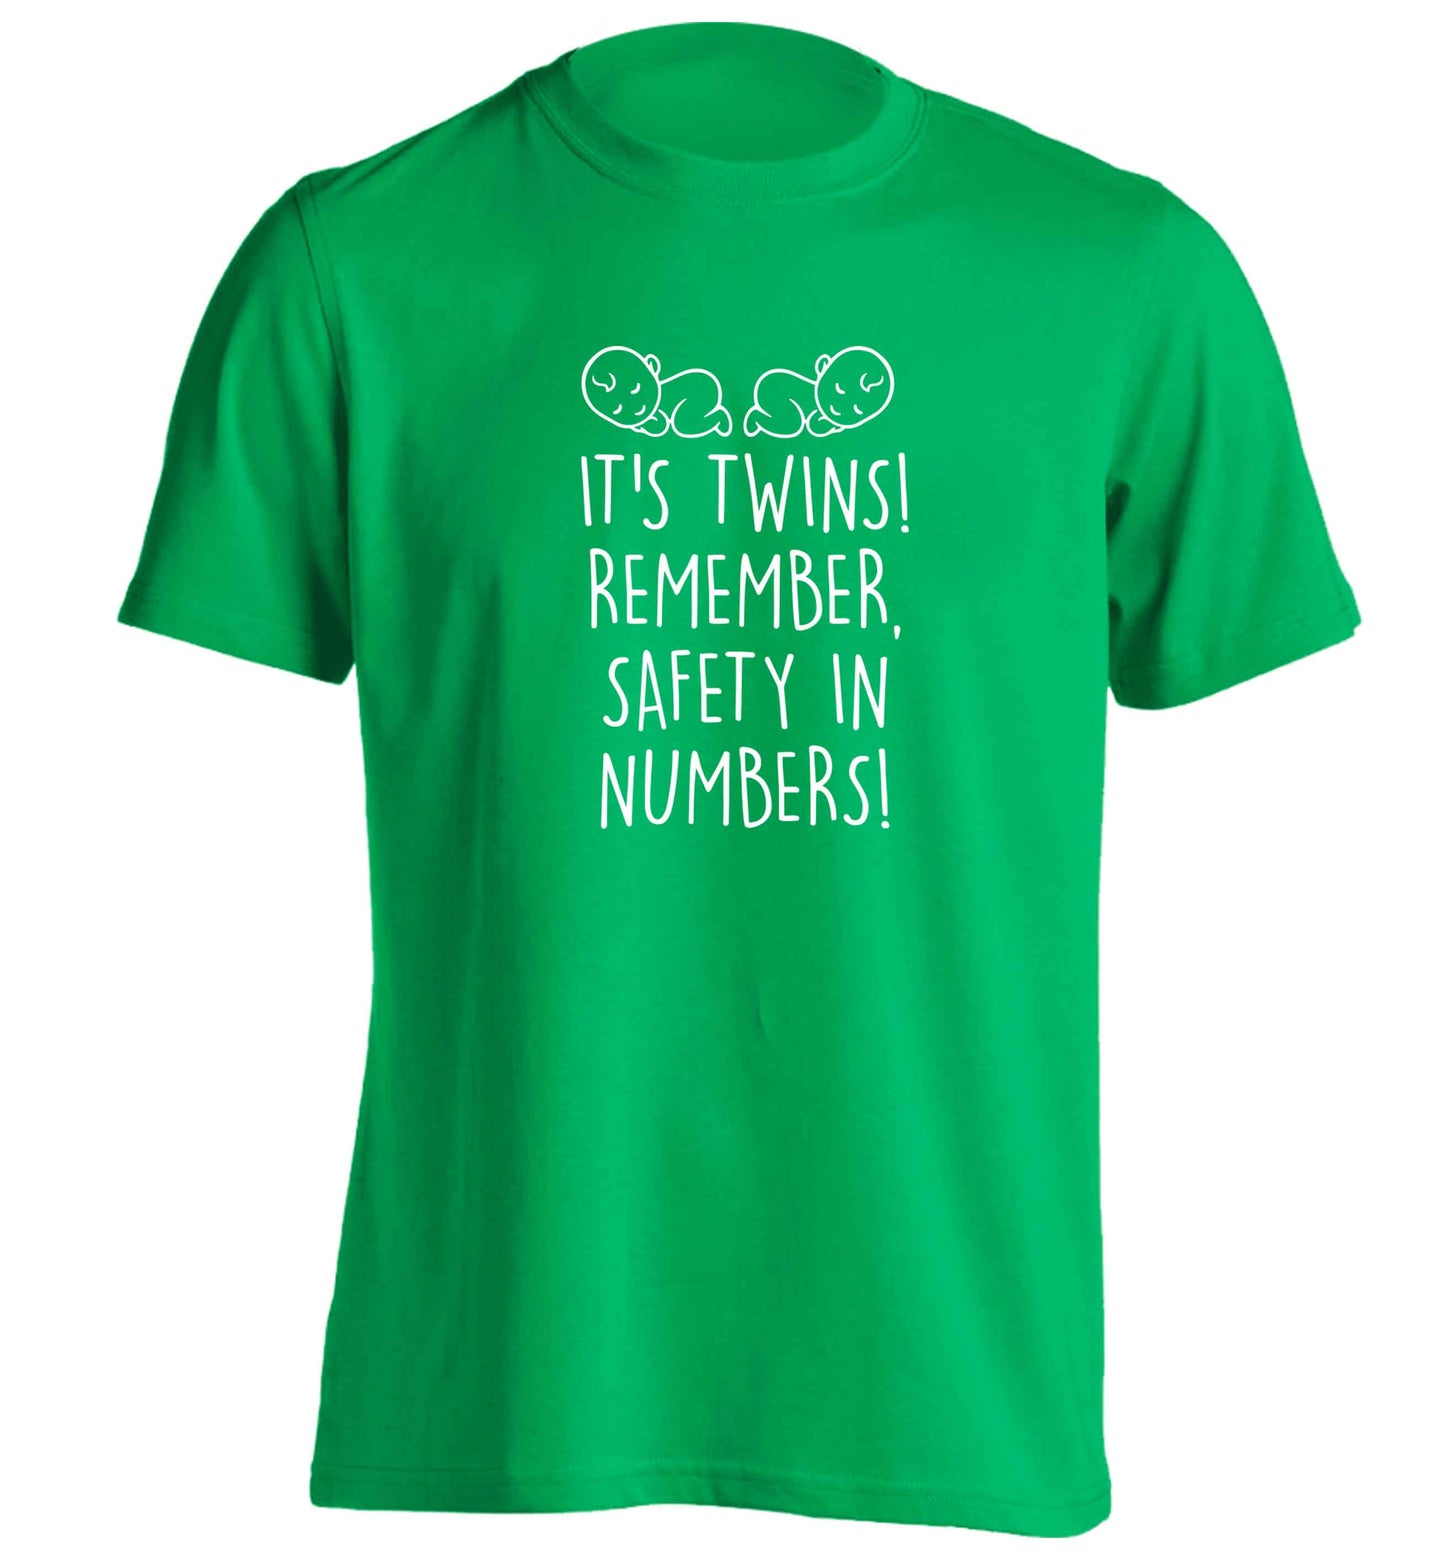 It's twins! Remember safety in numbers! adults unisex green Tshirt 2XL